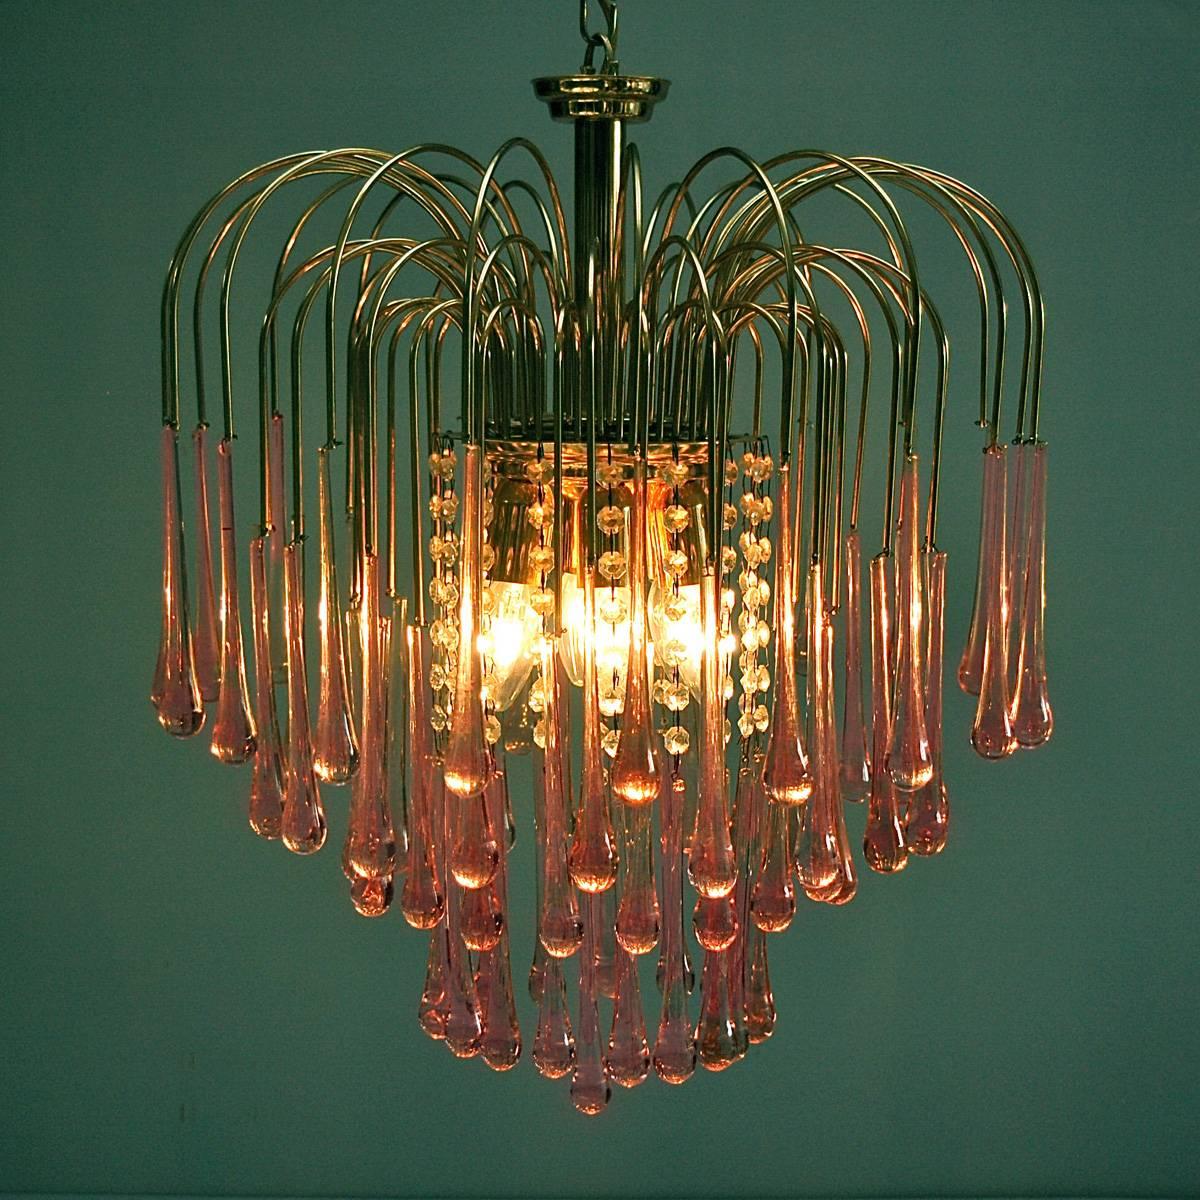 Mid-20th Century Murano pink crystal teardrop chandelier by 1960s Italian designer Paolo Venini. There are seventy-seven pink teardrops suspended from delicate brass extensions that seem to jet from the central light fitting like a water fountain.